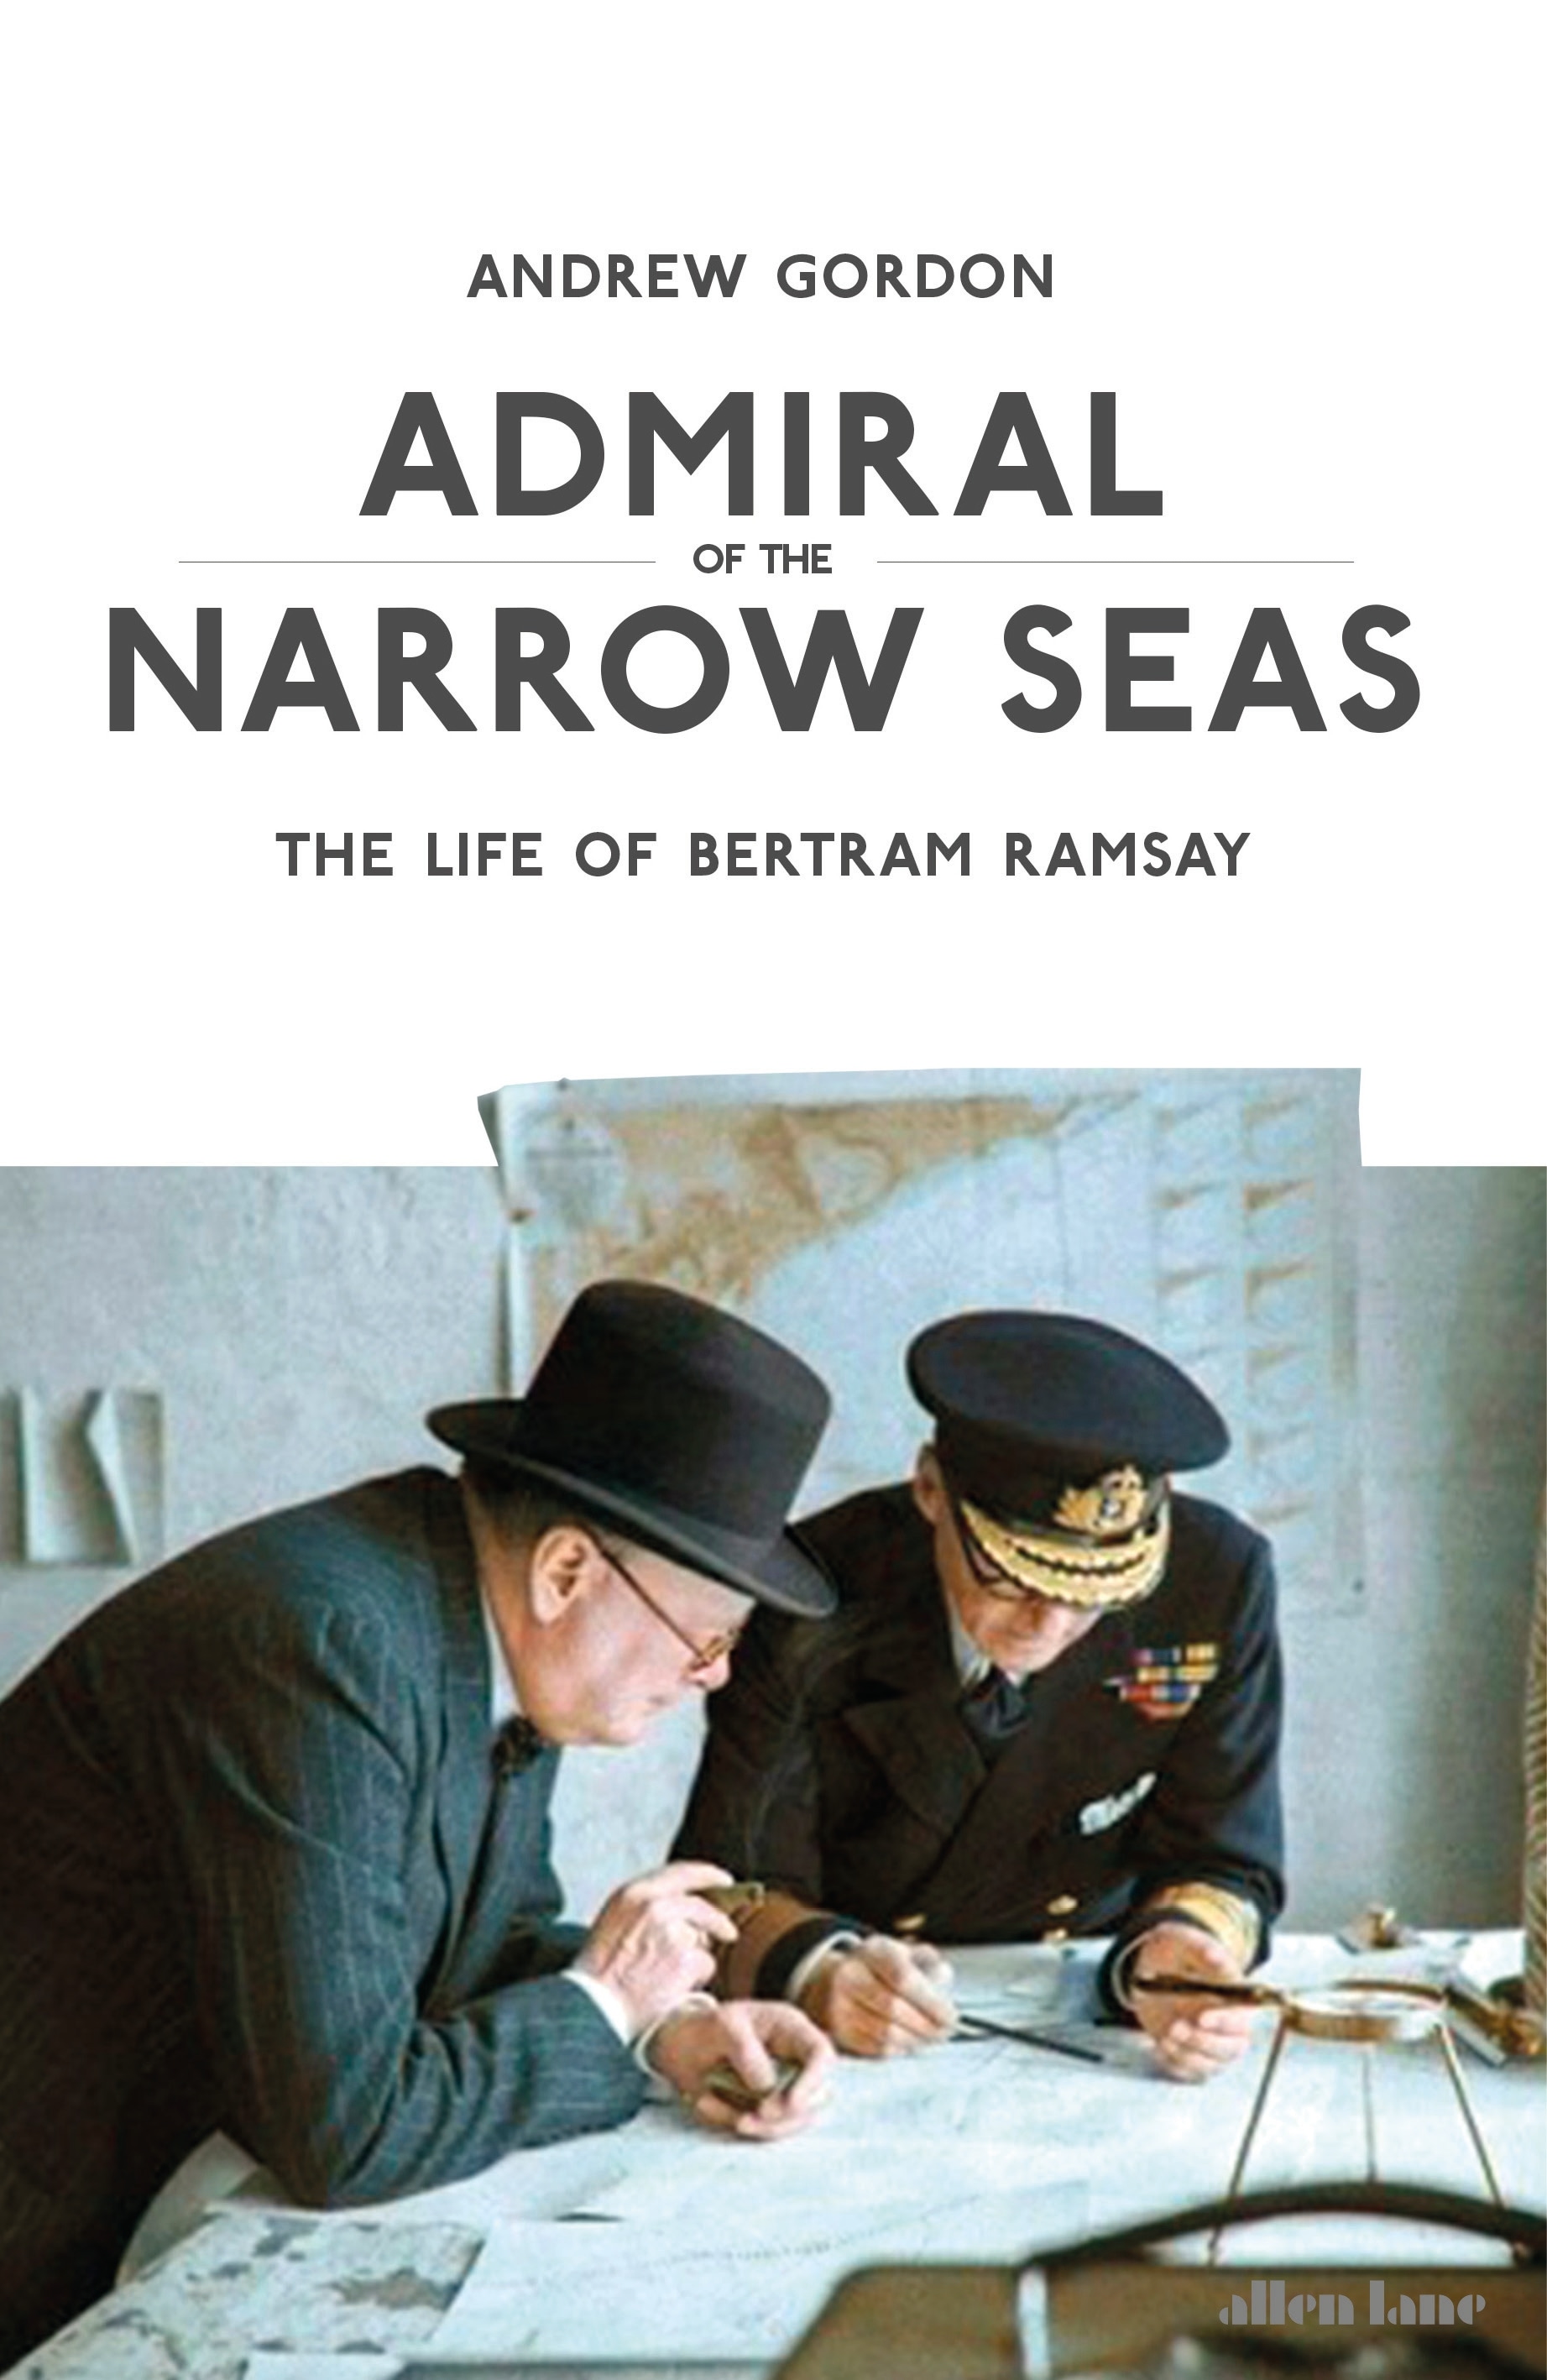 Book “Admiral of the Narrow Seas” by Andrew Gordon — August 4, 2022